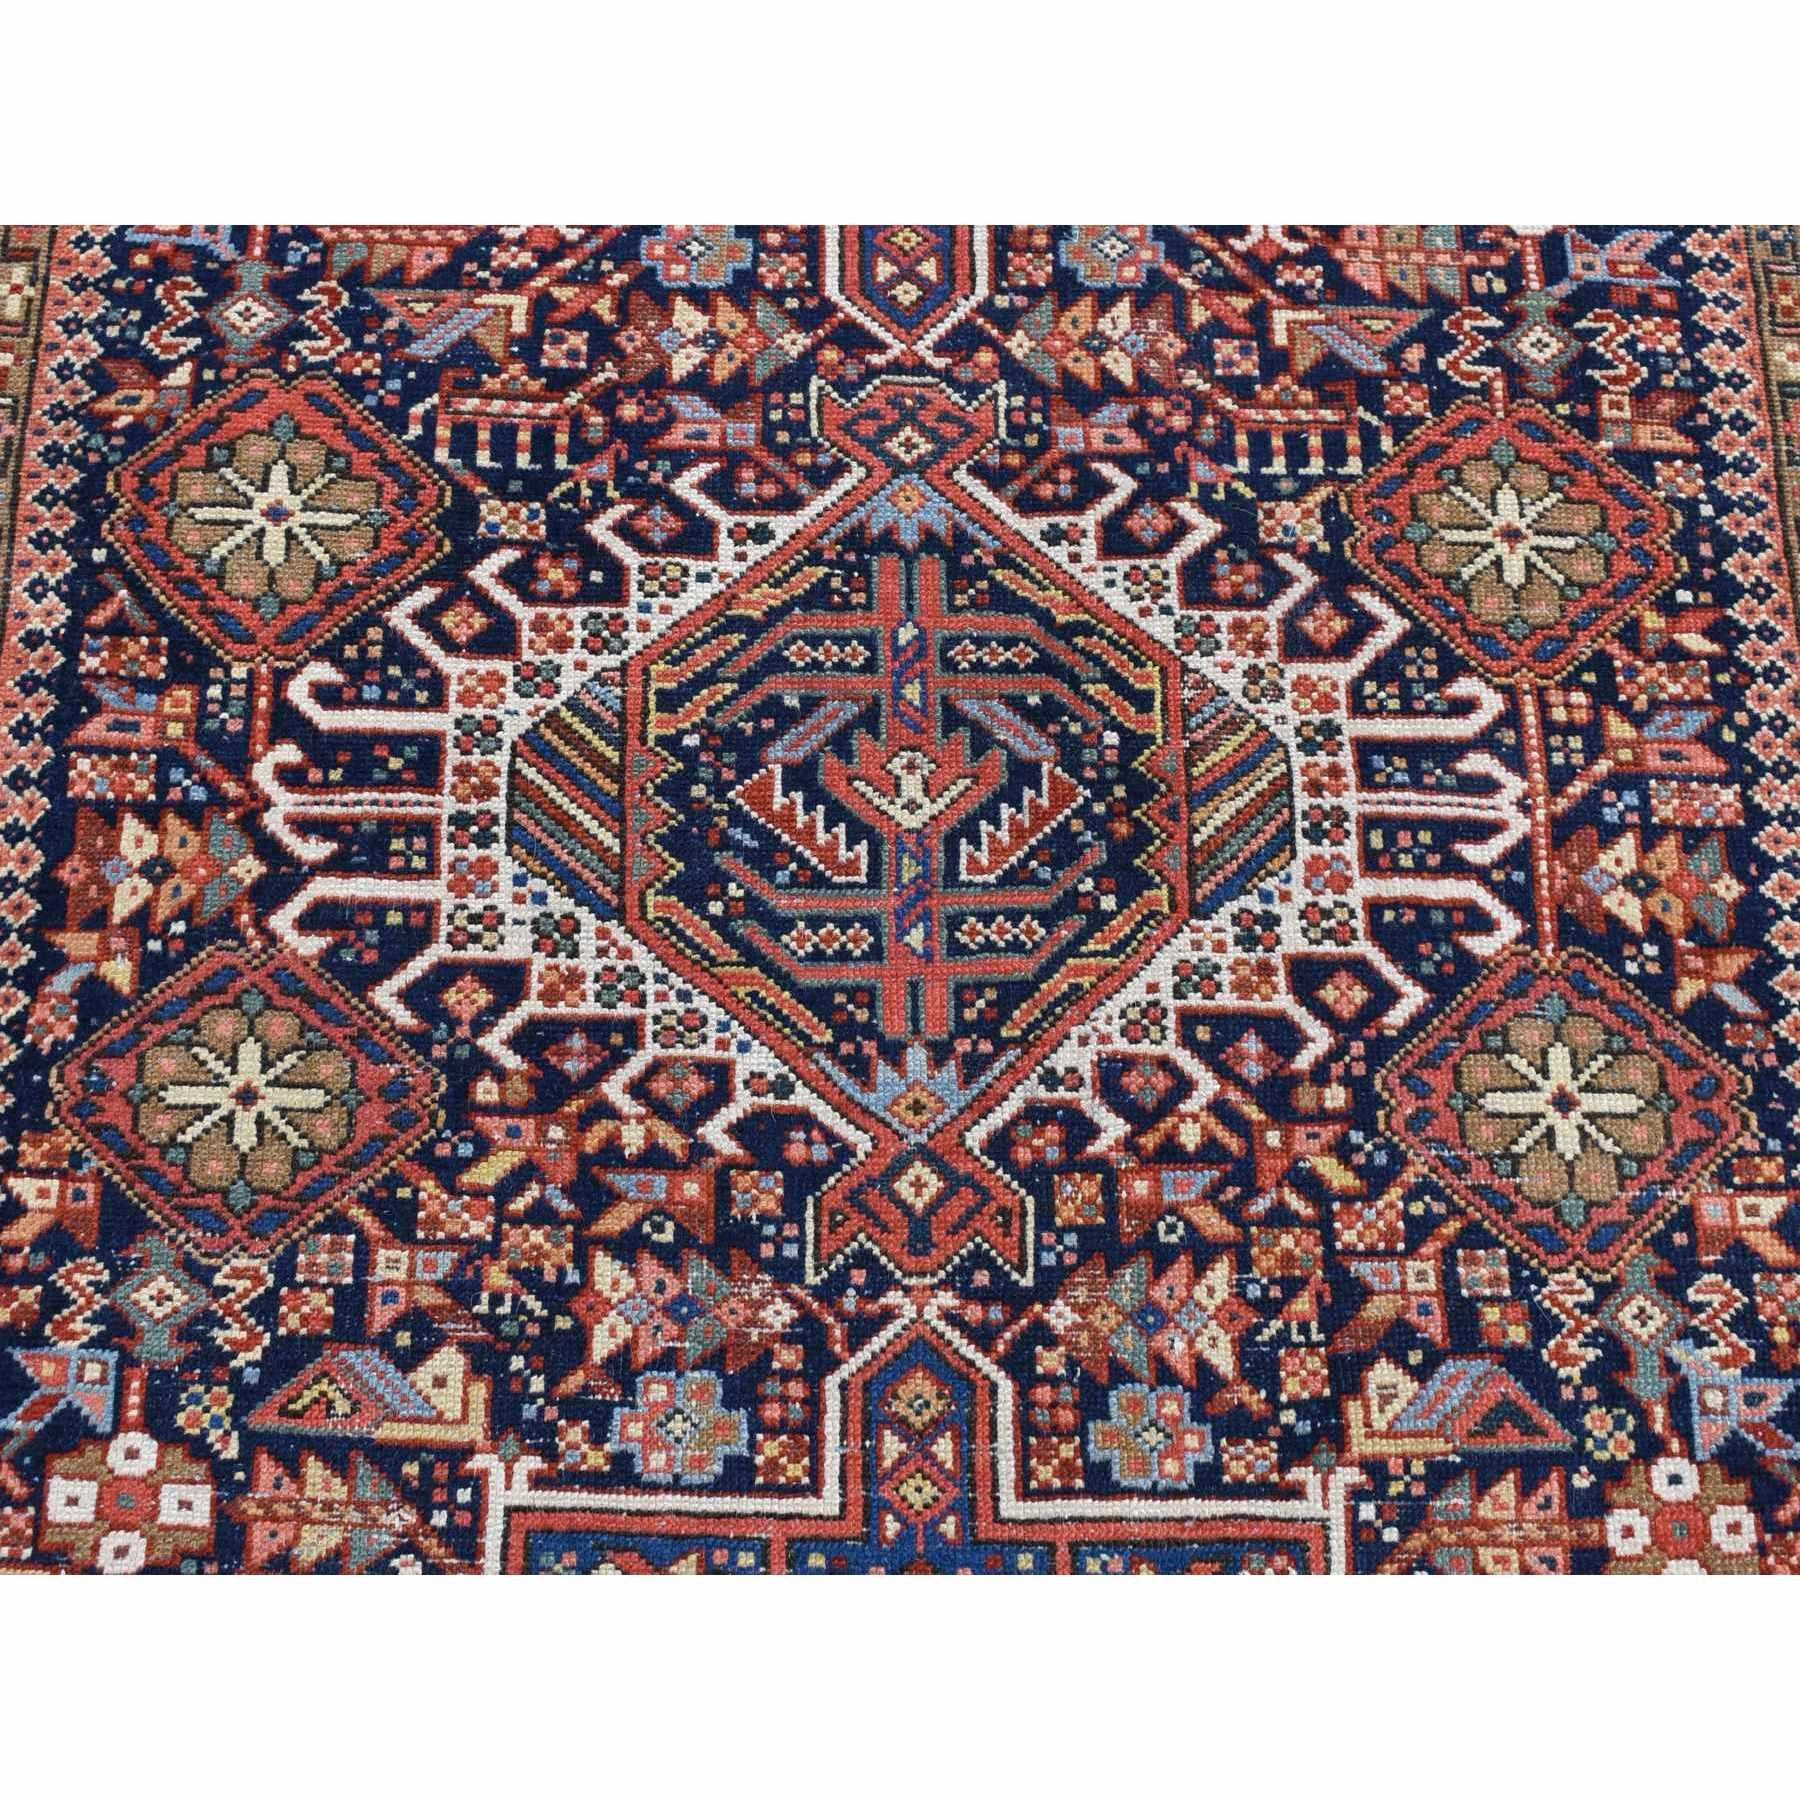 Hand-Knotted Denim Antique Persian Karajeh Good Condition Soft Wool Hand Knotted Clean Rug